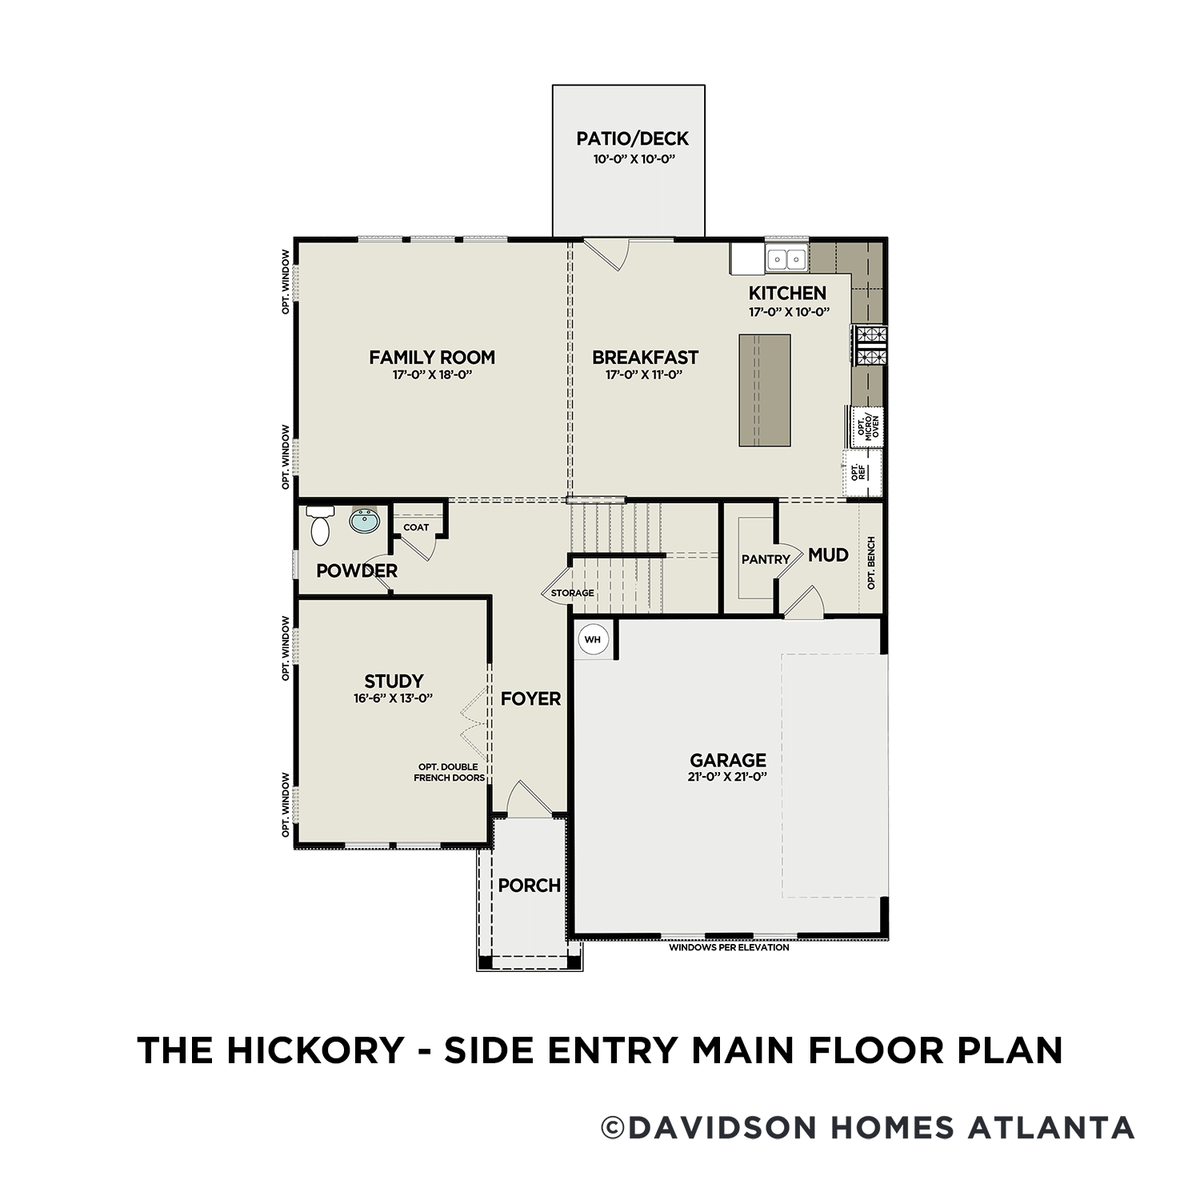 1 - The Hickory A – Side Entry buildable floor plan layout in Davidson Homes' Mountainbrook community.